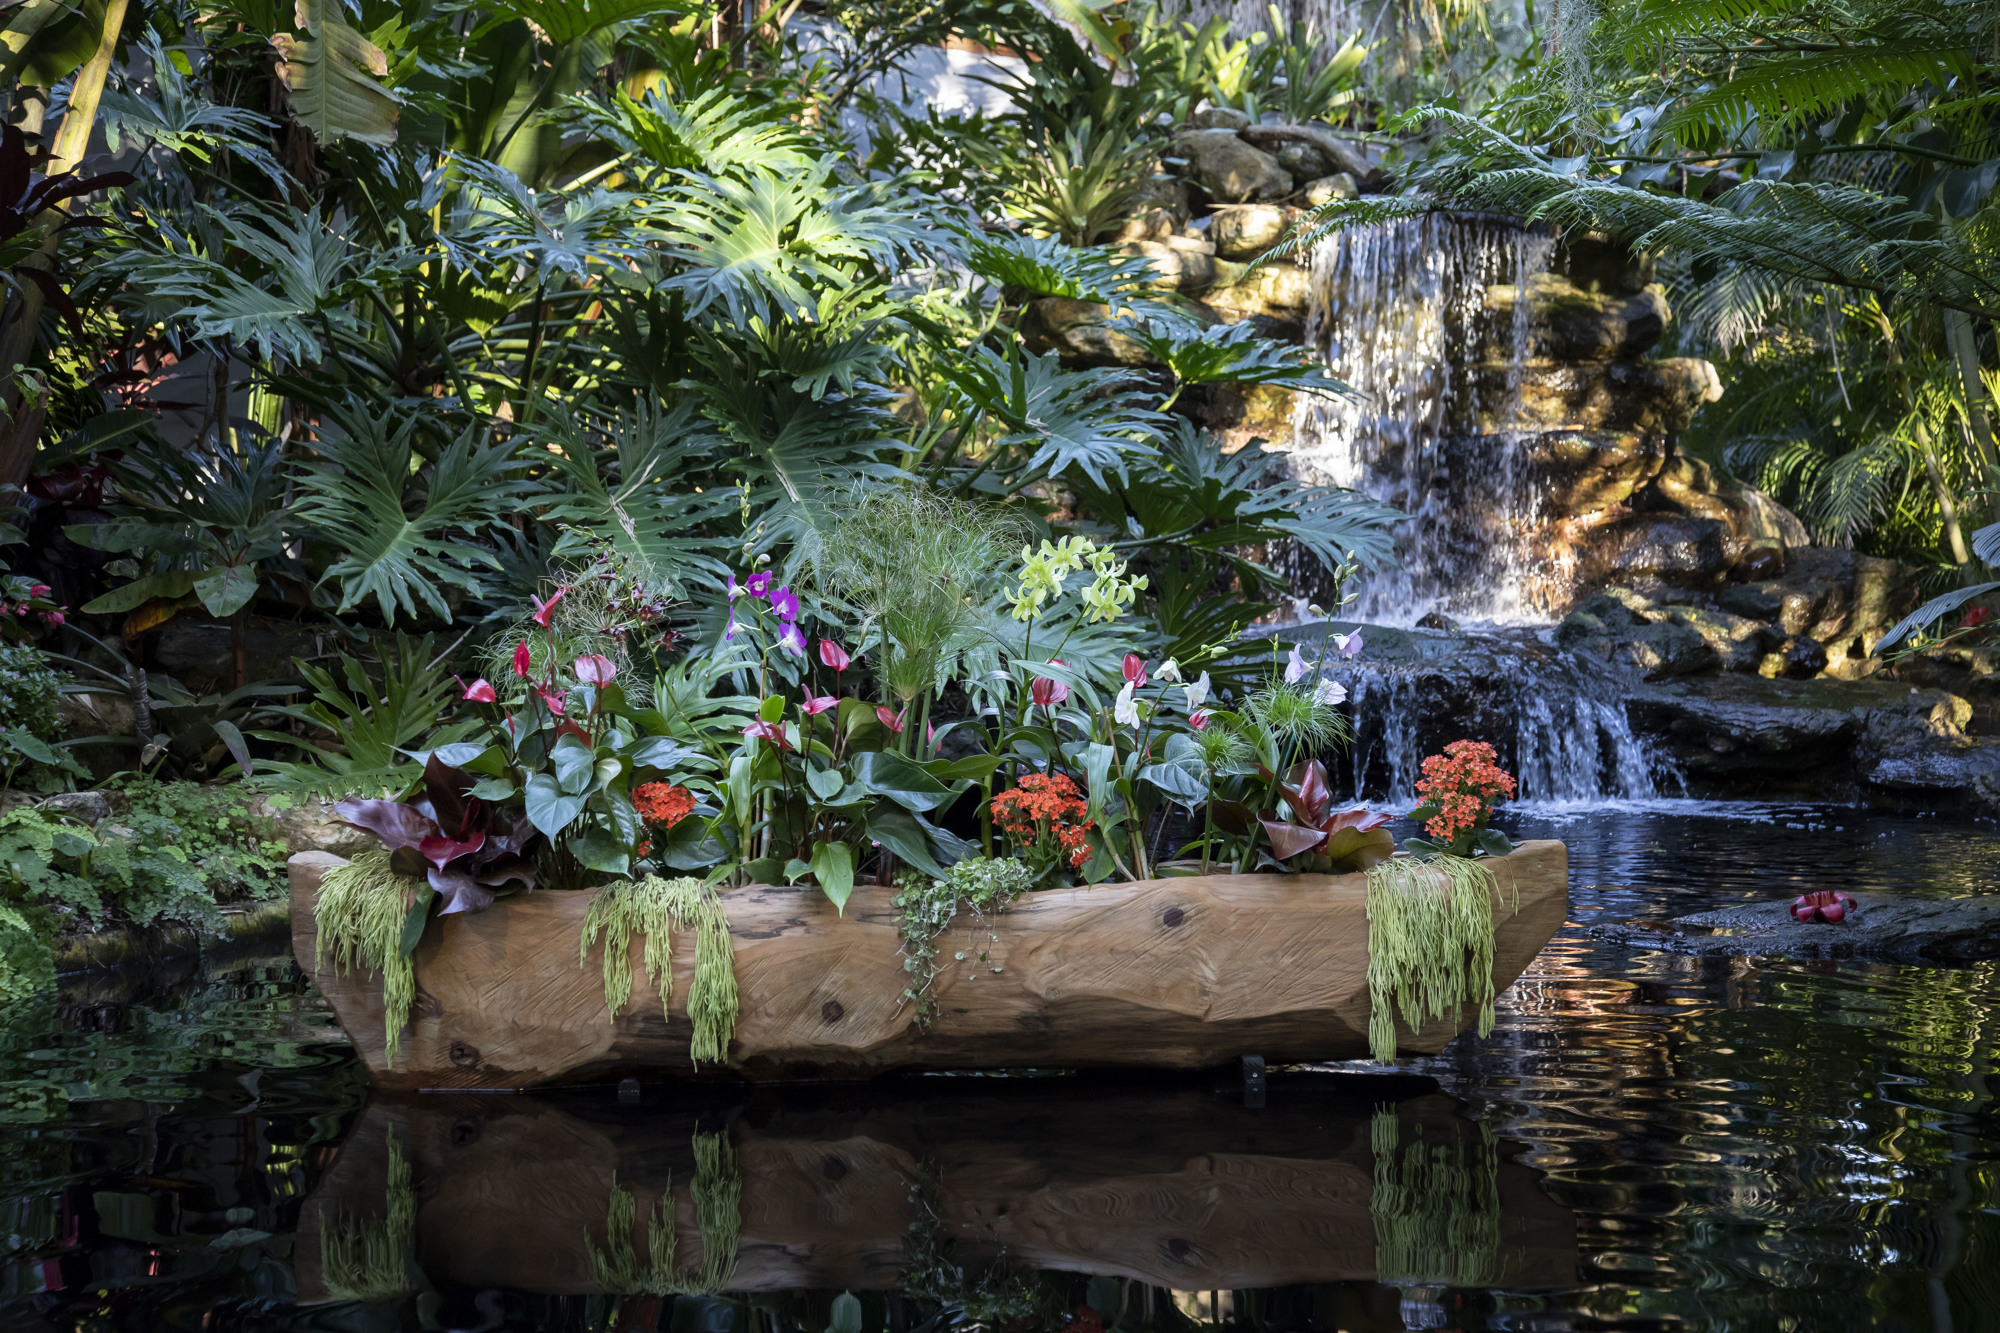 The koi pond now features canoes, Tikis and a waterfall for the exhibit. Photo courtesy Marie Selby Botanical Gardens